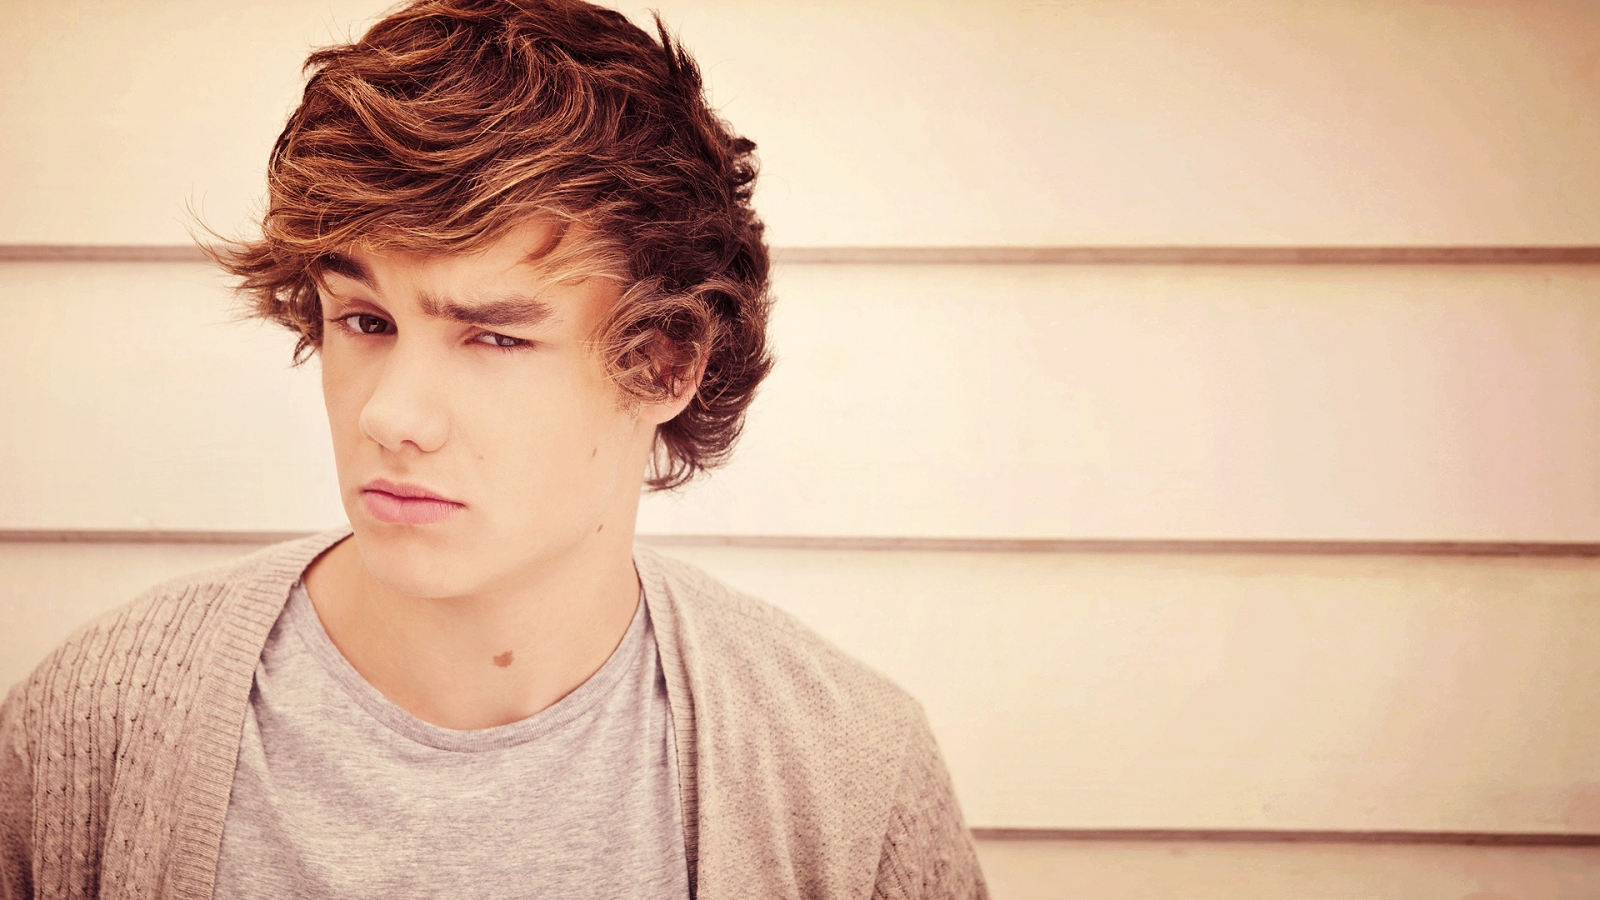 Liam Payne Look for 1600 x 900 HDTV resolution